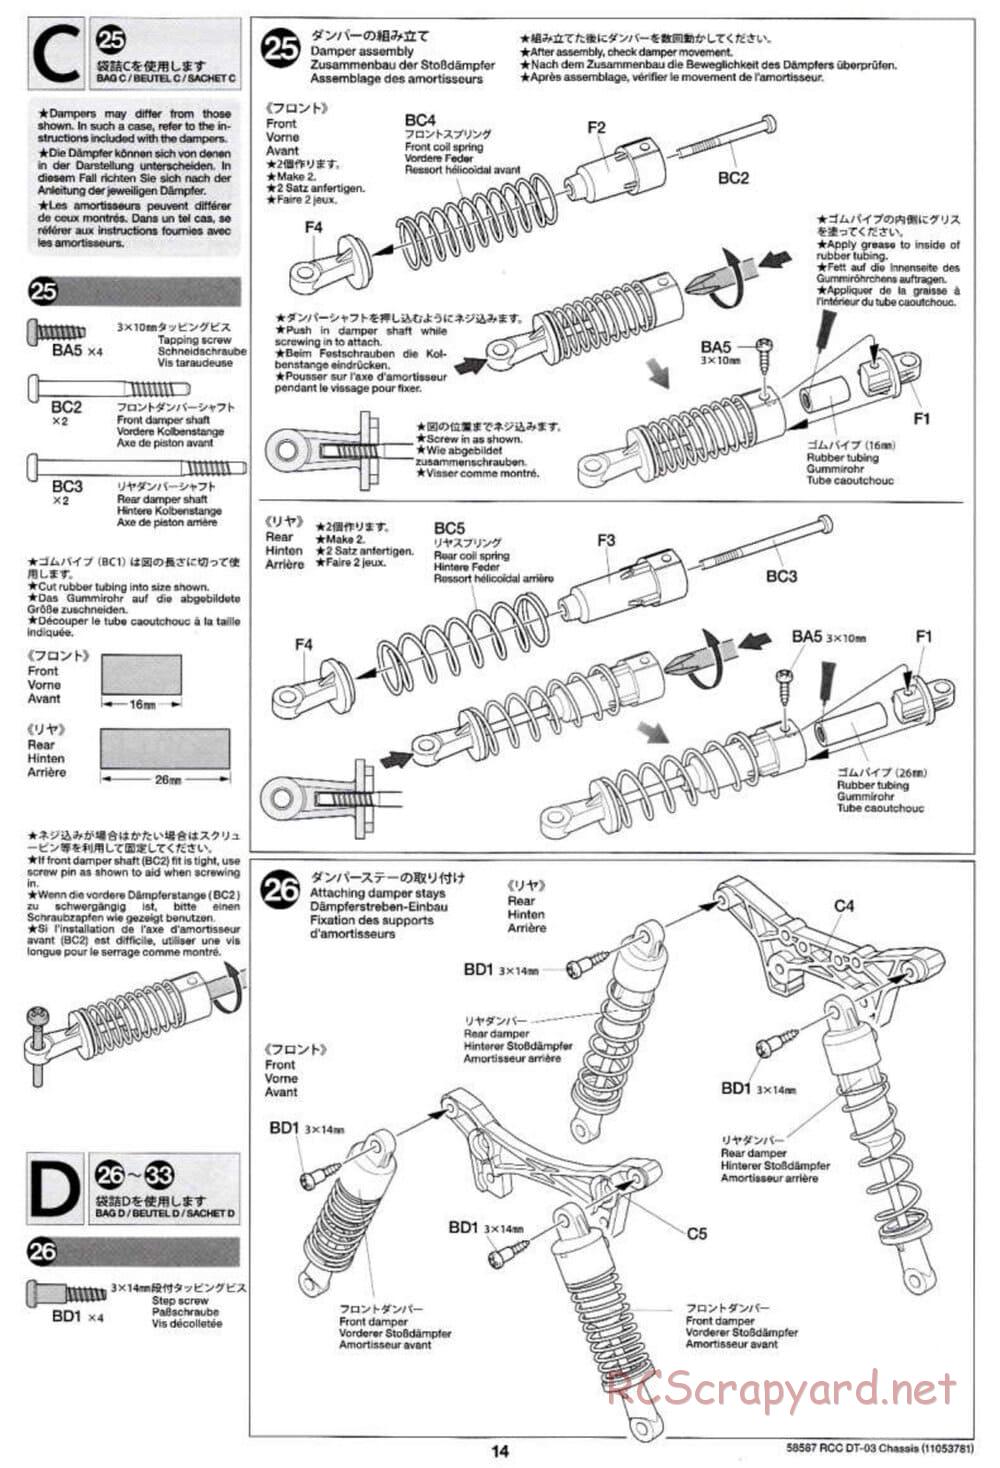 Tamiya - Neo Fighter Buggy Chassis - Manual - Page 14